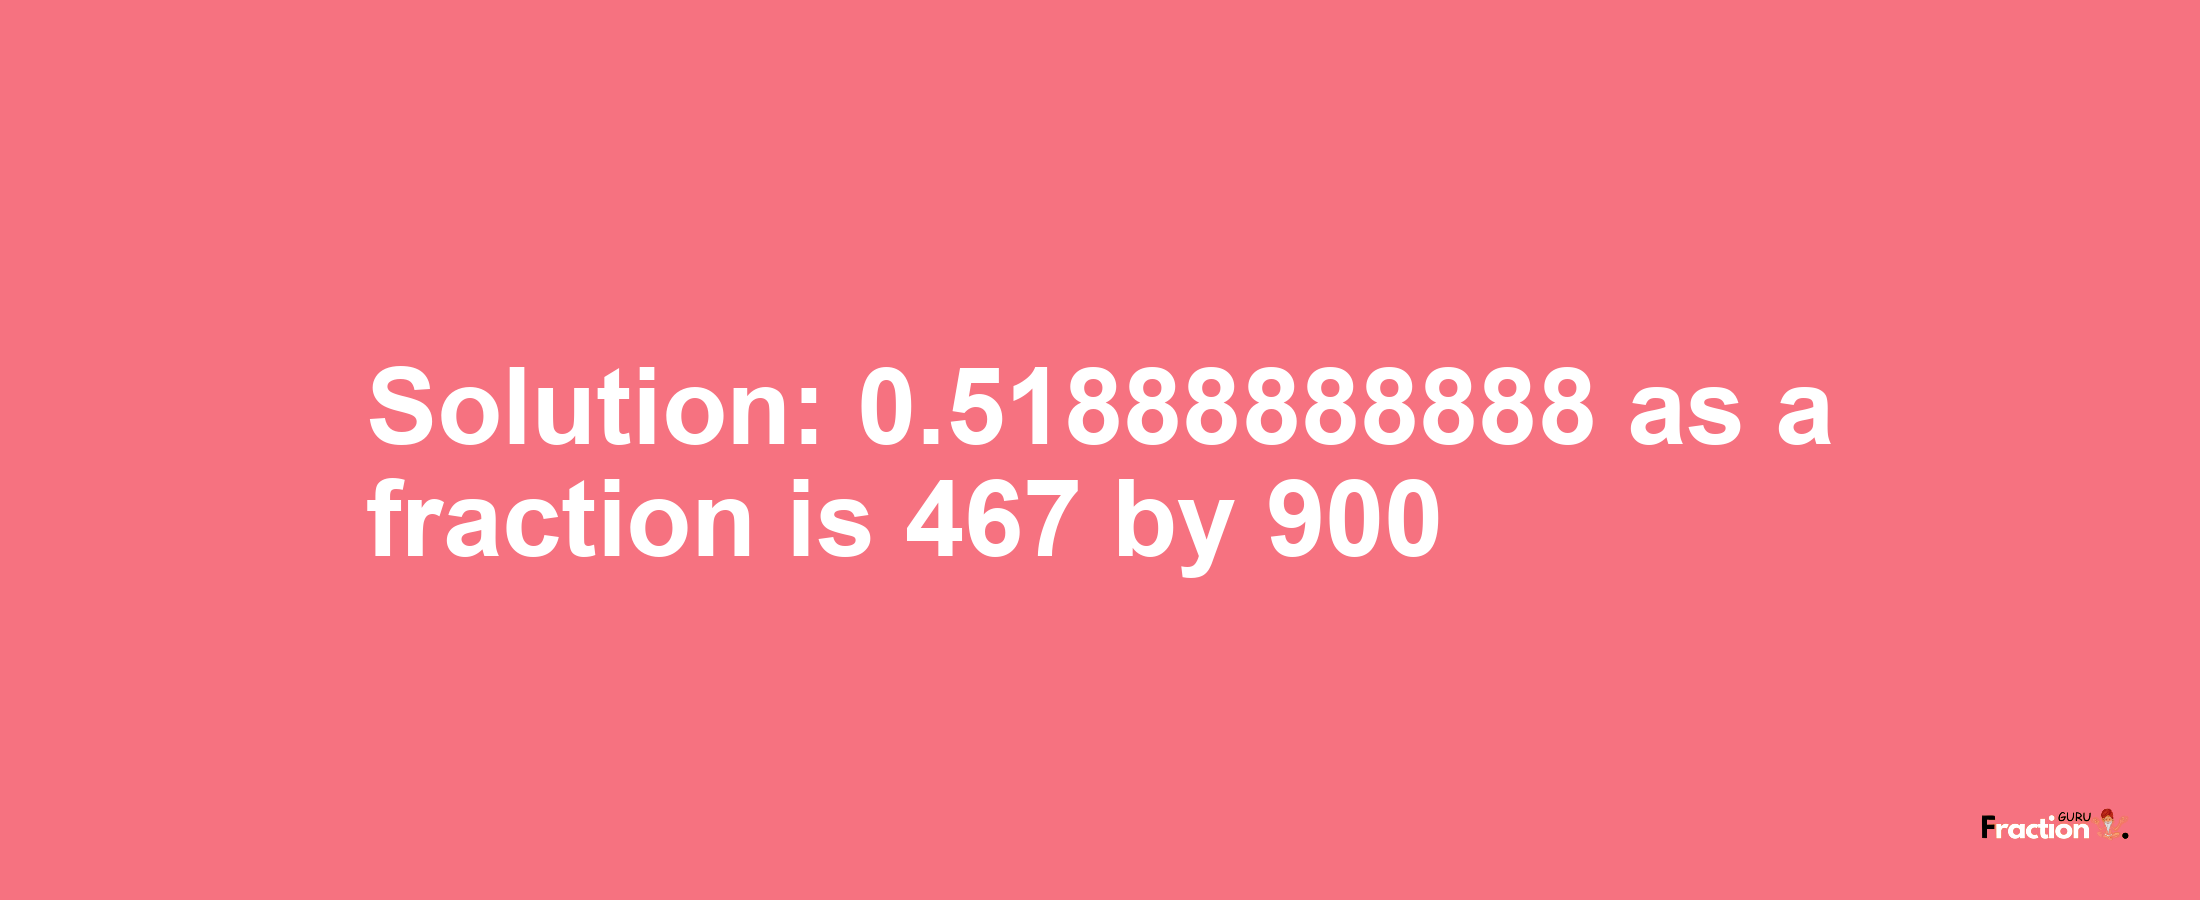 Solution:0.51888888888 as a fraction is 467/900